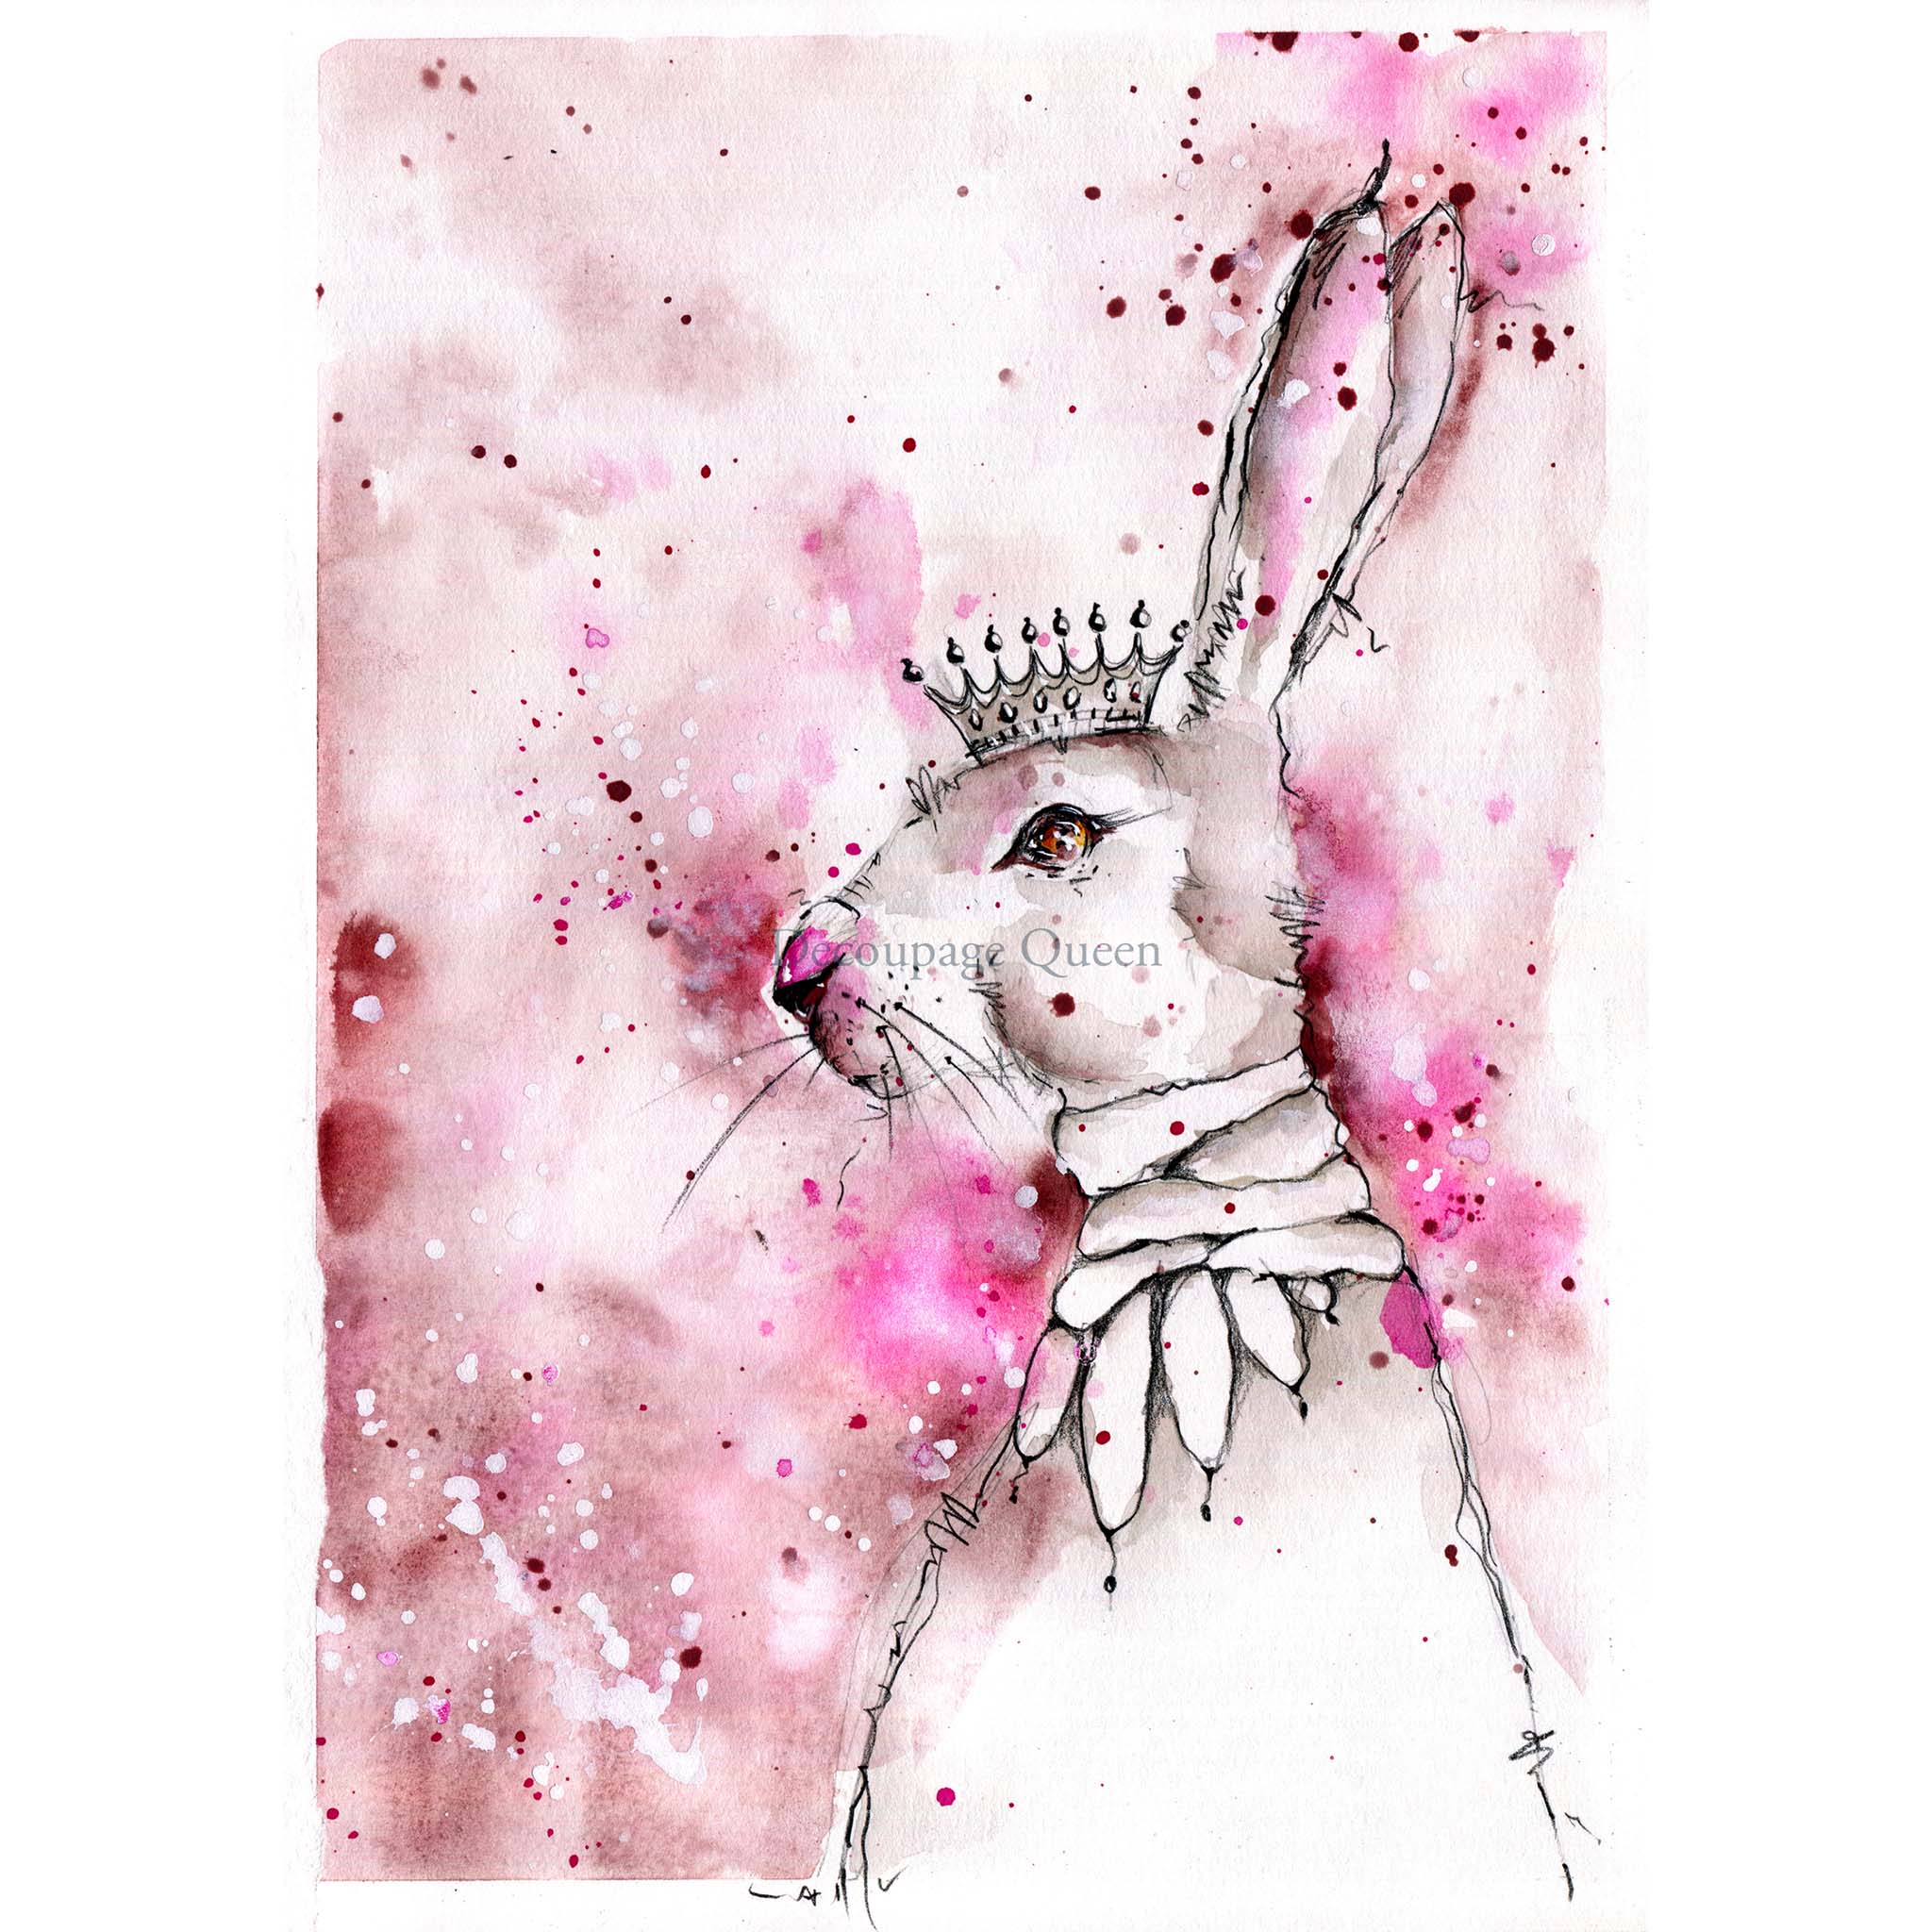 A3 rice paper that features a pink watercolor background and a charming white rabbit wearing a crown and necklace is against a white background.